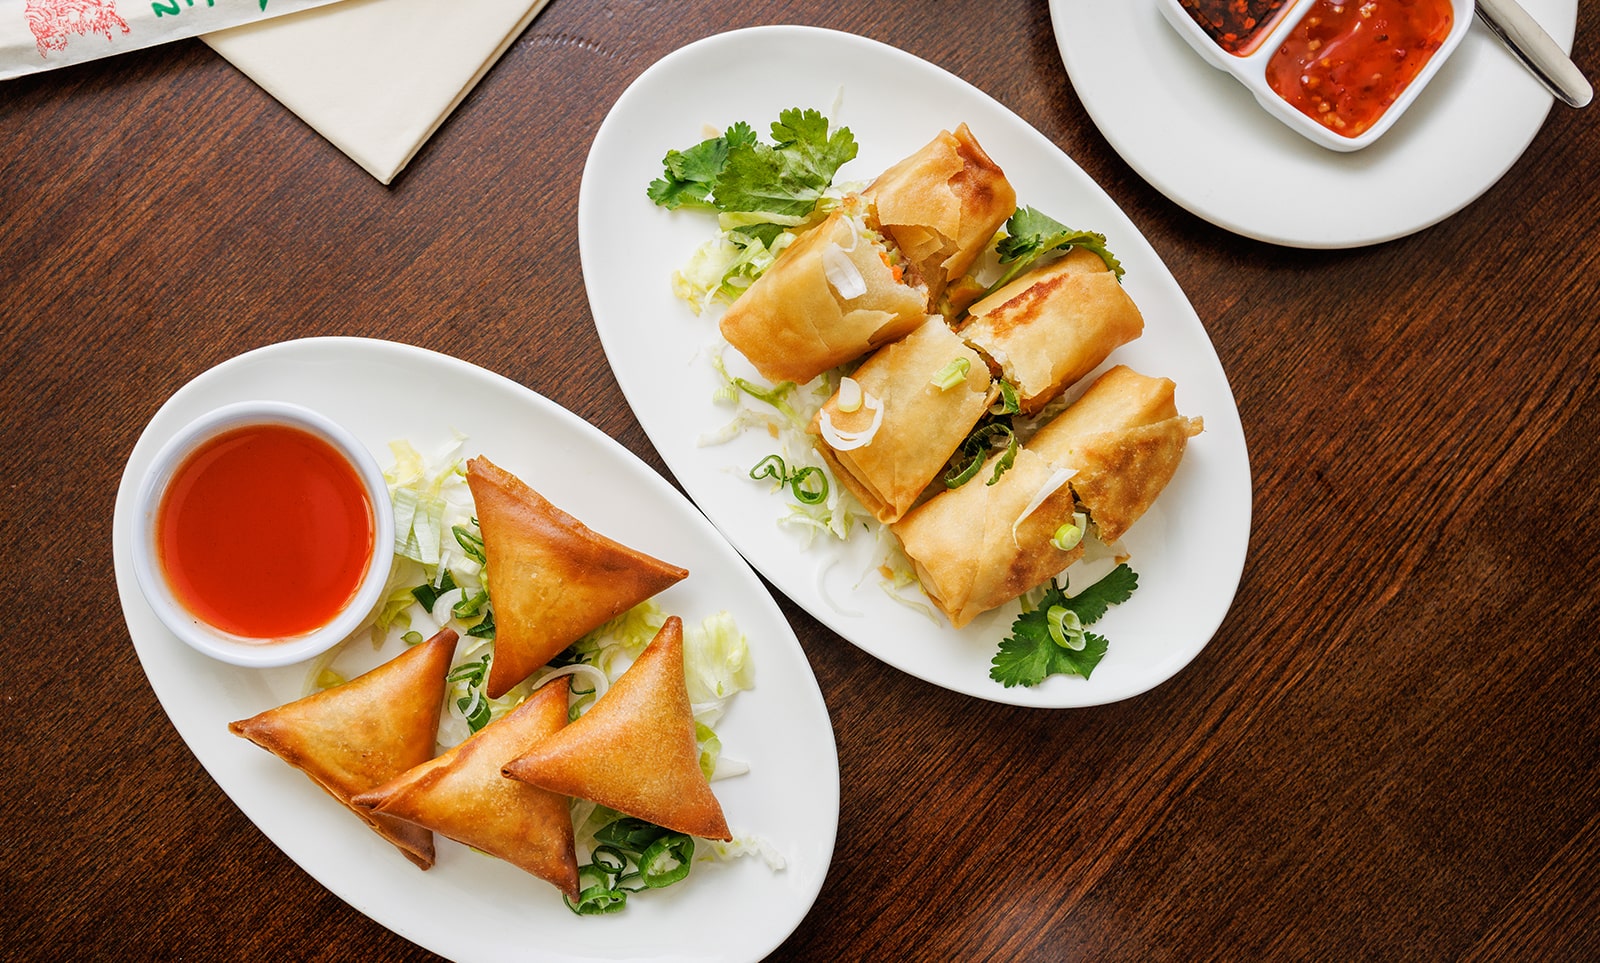 Deep Fried Vegetarian Spring Rolls and Curried Parcels 炸齋春卷 & 炸齋咖哩角